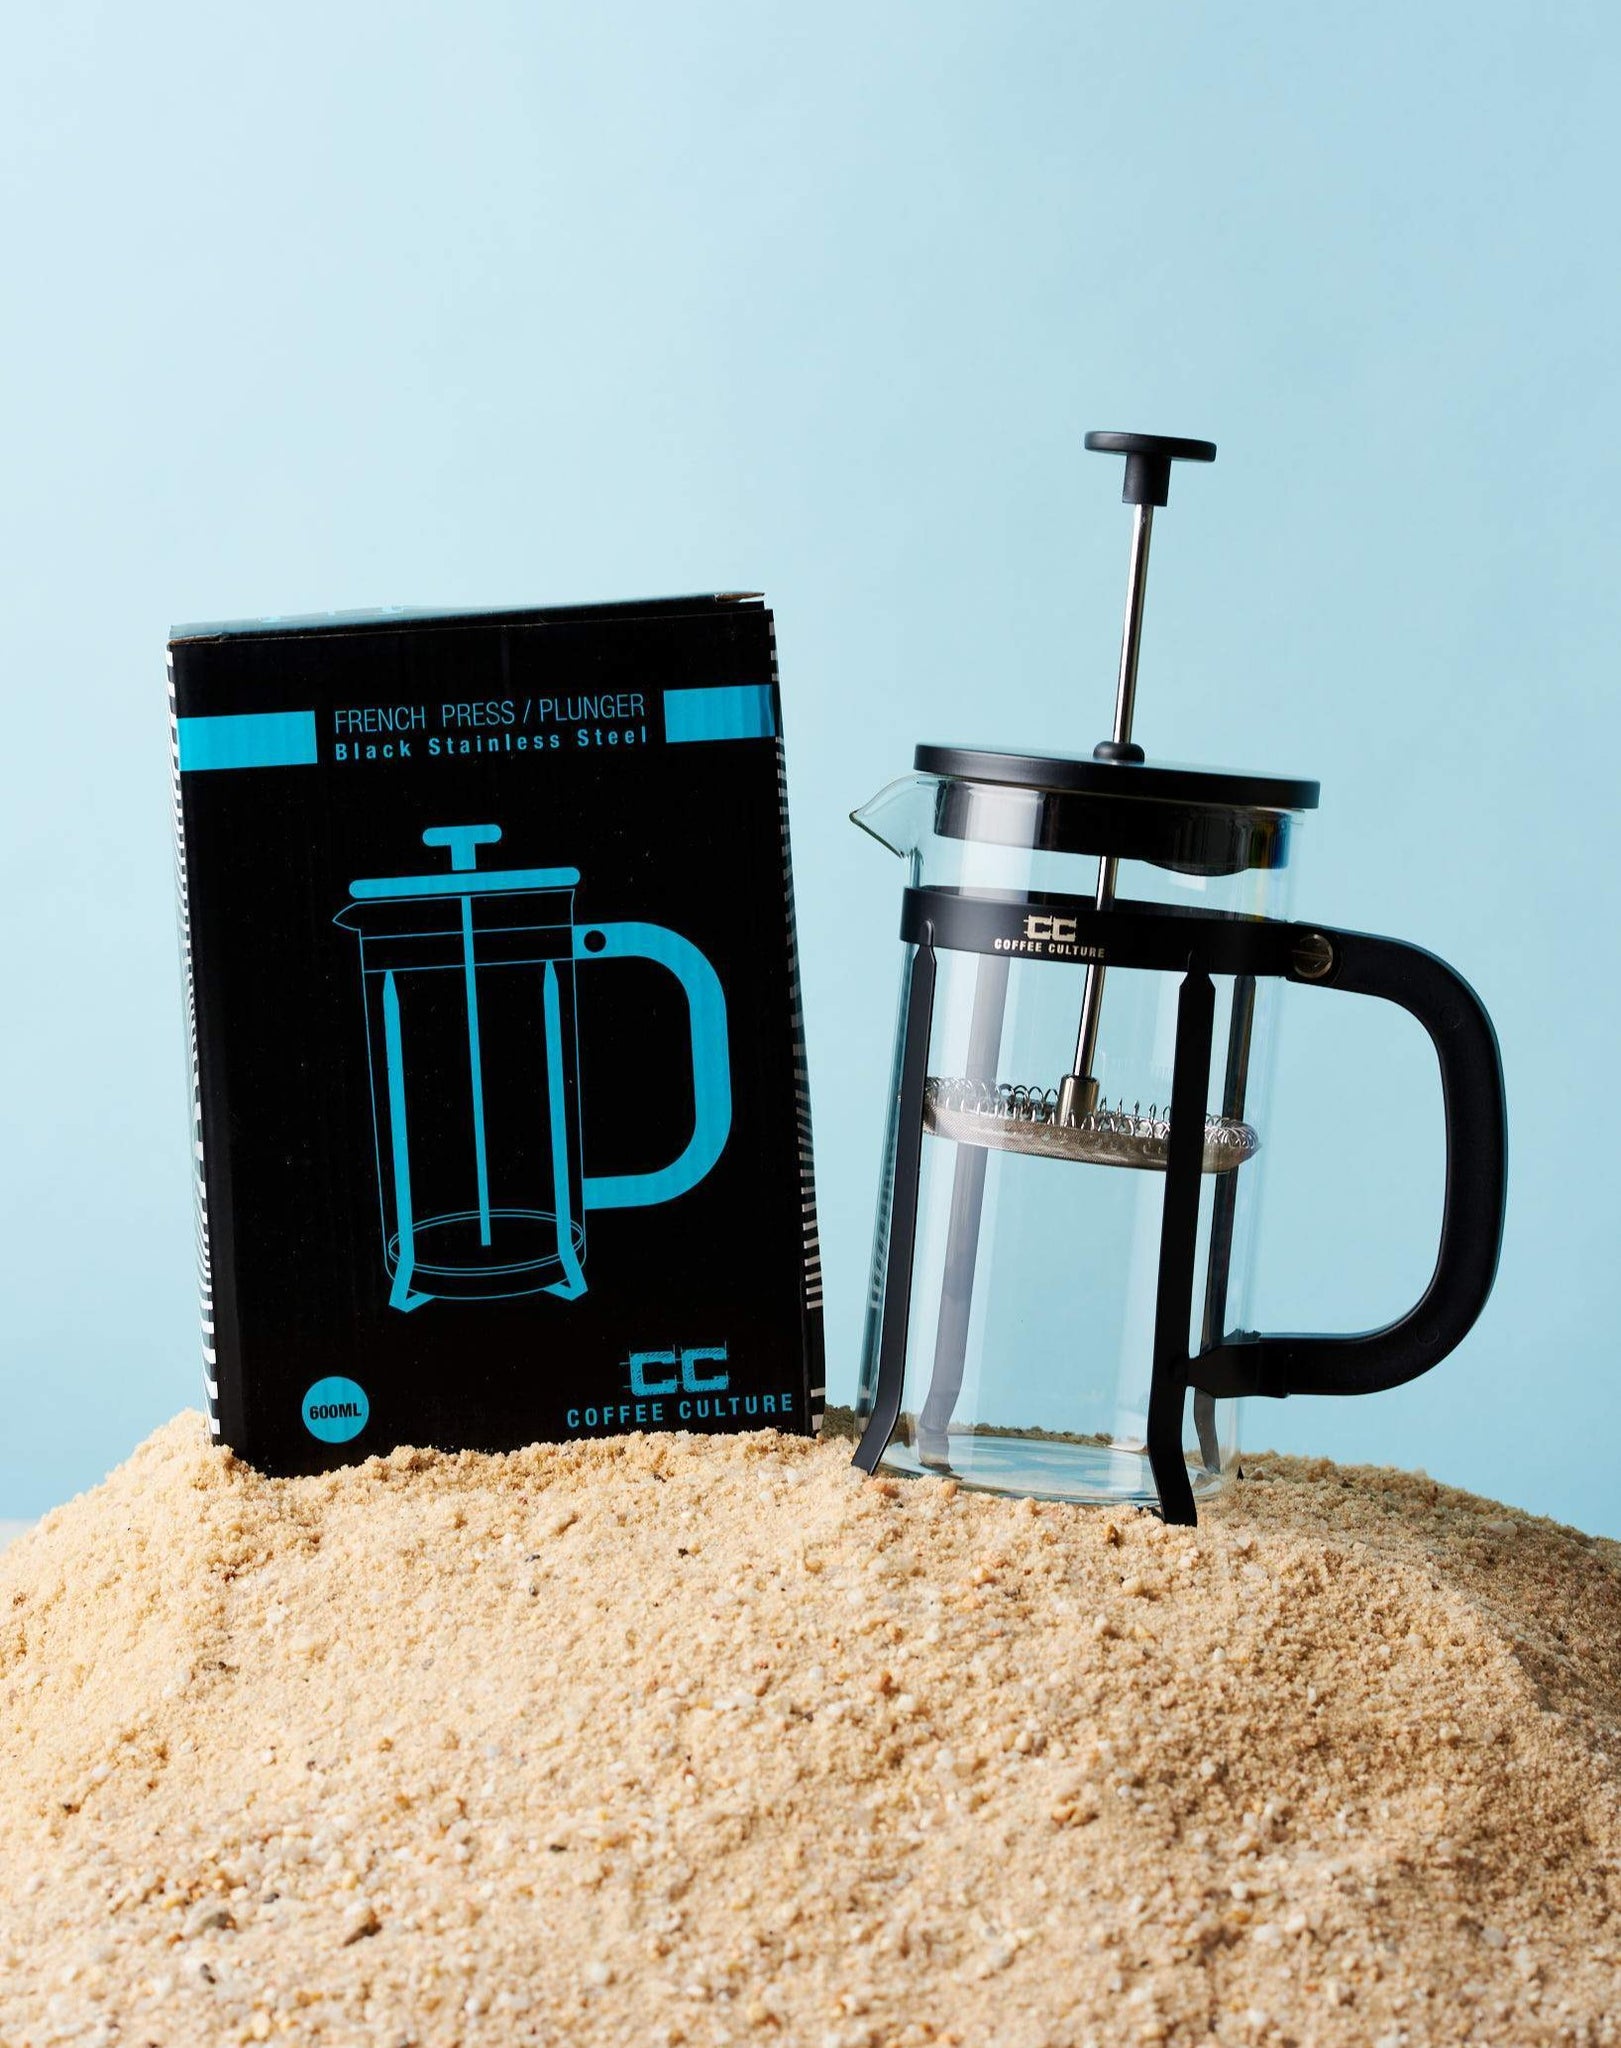 Plunger french press coffee maker